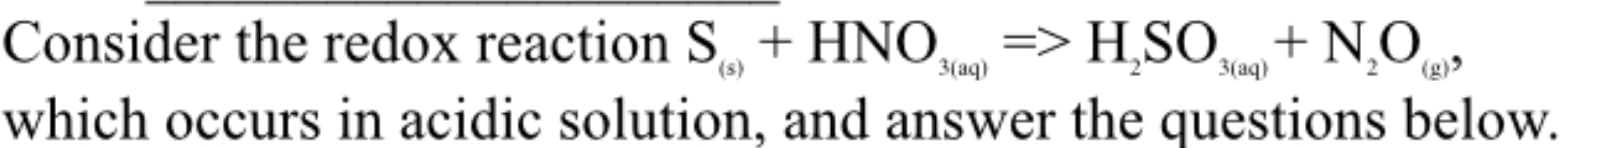 HSO NO,
(g)>
Consider the redox reaction S
HNO,
(s)
3(аq)
3(аq)
which occurs in acidic solution, and answer the questions below
